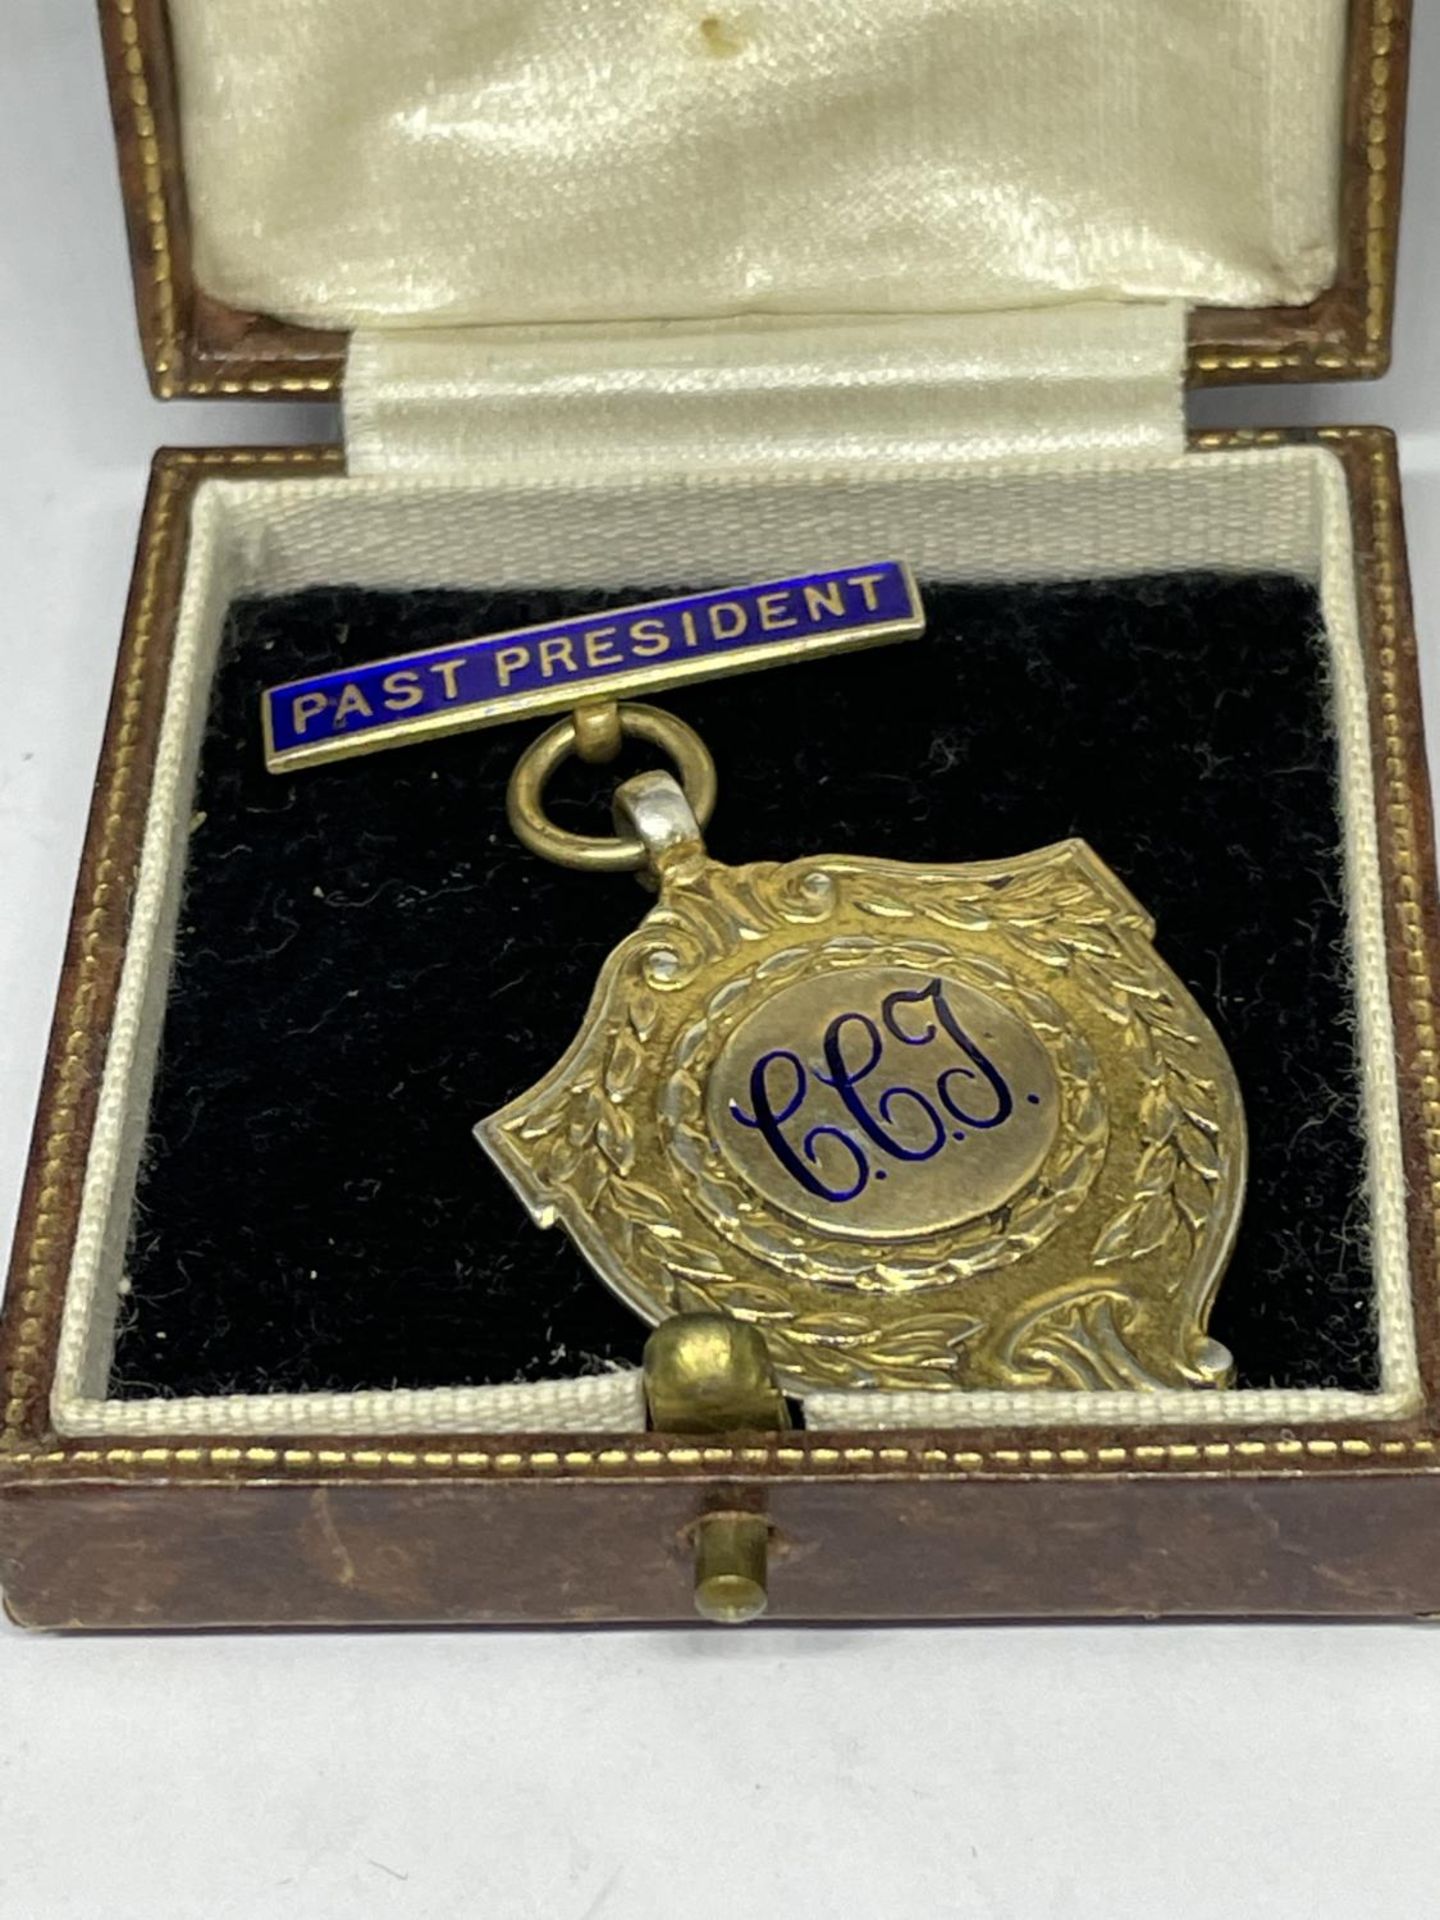 A HALLMARKED BIRMINGHAM SILVER PAST PRESIDENT MEDAL IN A PRESENTATION BOX - Image 5 of 6